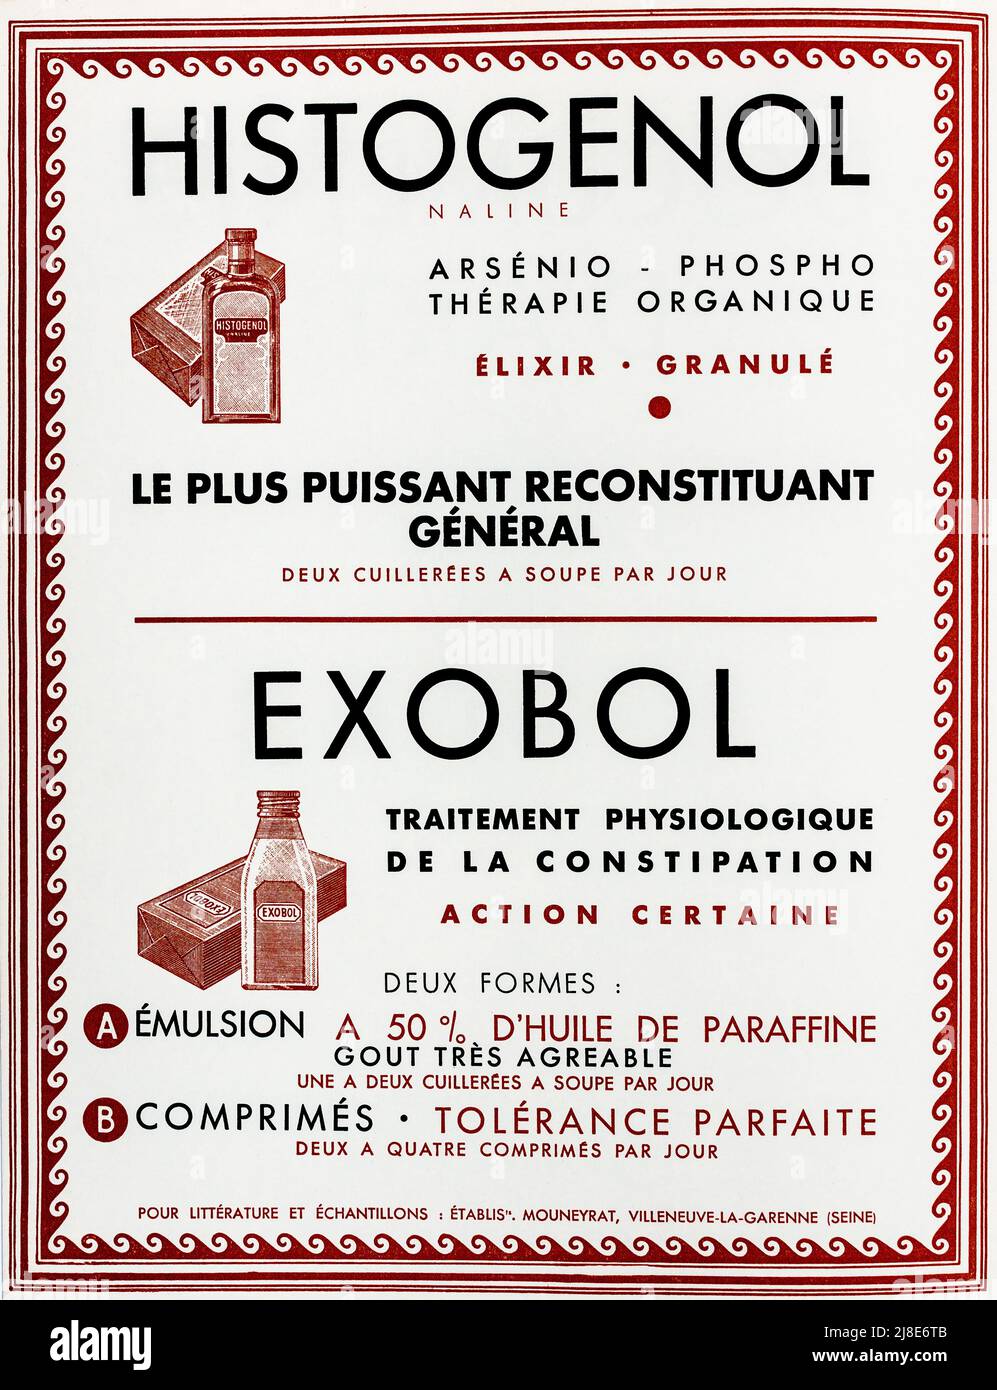 French 1950s advertisement for Histogenol and Exobol. Stock Photo